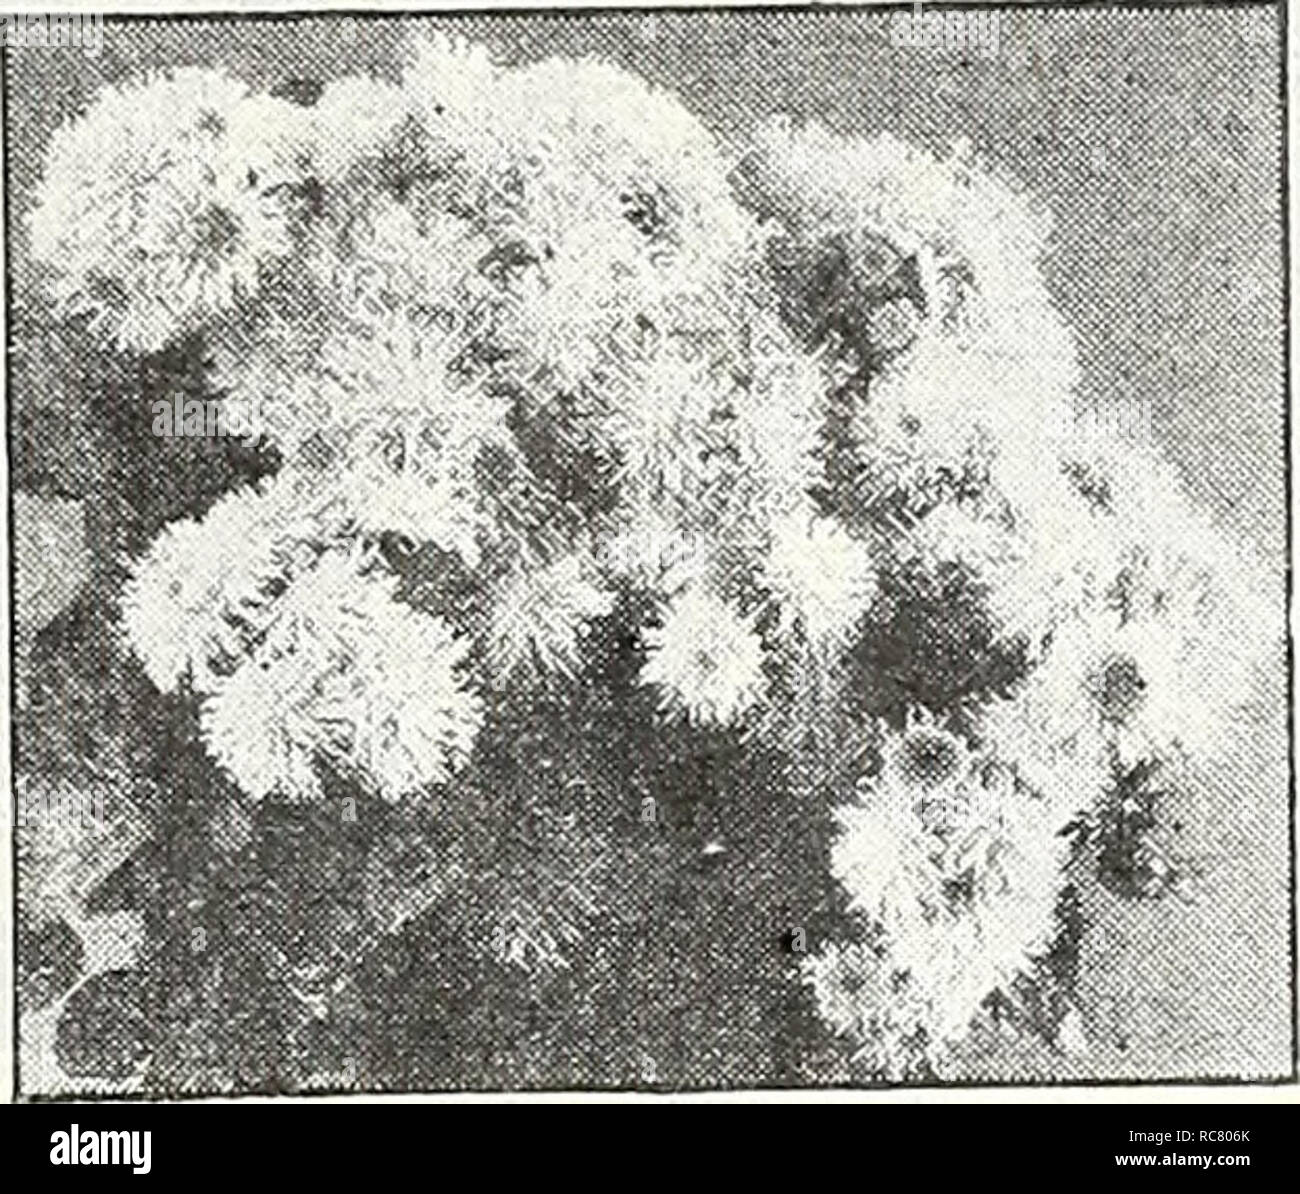 . Dreer's garden book for 1947. Seeds Catalogs; Nursery stock Catalogs; Gardening Equipment and supplies Catalogs; Flowers Seeds Catalogs; Vegetables Seeds Catalogs; Fruit Seeds Catalogs. Achillea ptarmica. The Pearl Achillea—^''/«'' t^^] ® 1012 Filipendula, Cloth of Cold. Strong,* vigorous plants with vivid yellow flowers during the summer. 3 ft. Pkt. 15c; large pkt. 60c. 1015 Ptarmica, The Pearl. One of the best hardy white perennials. Grows about 2 feet tall and is cov- ered with heads of pure white dou- ble flowers from June until frost. Flowers the first season if sown early. Pkt. ISc; la Stock Photo